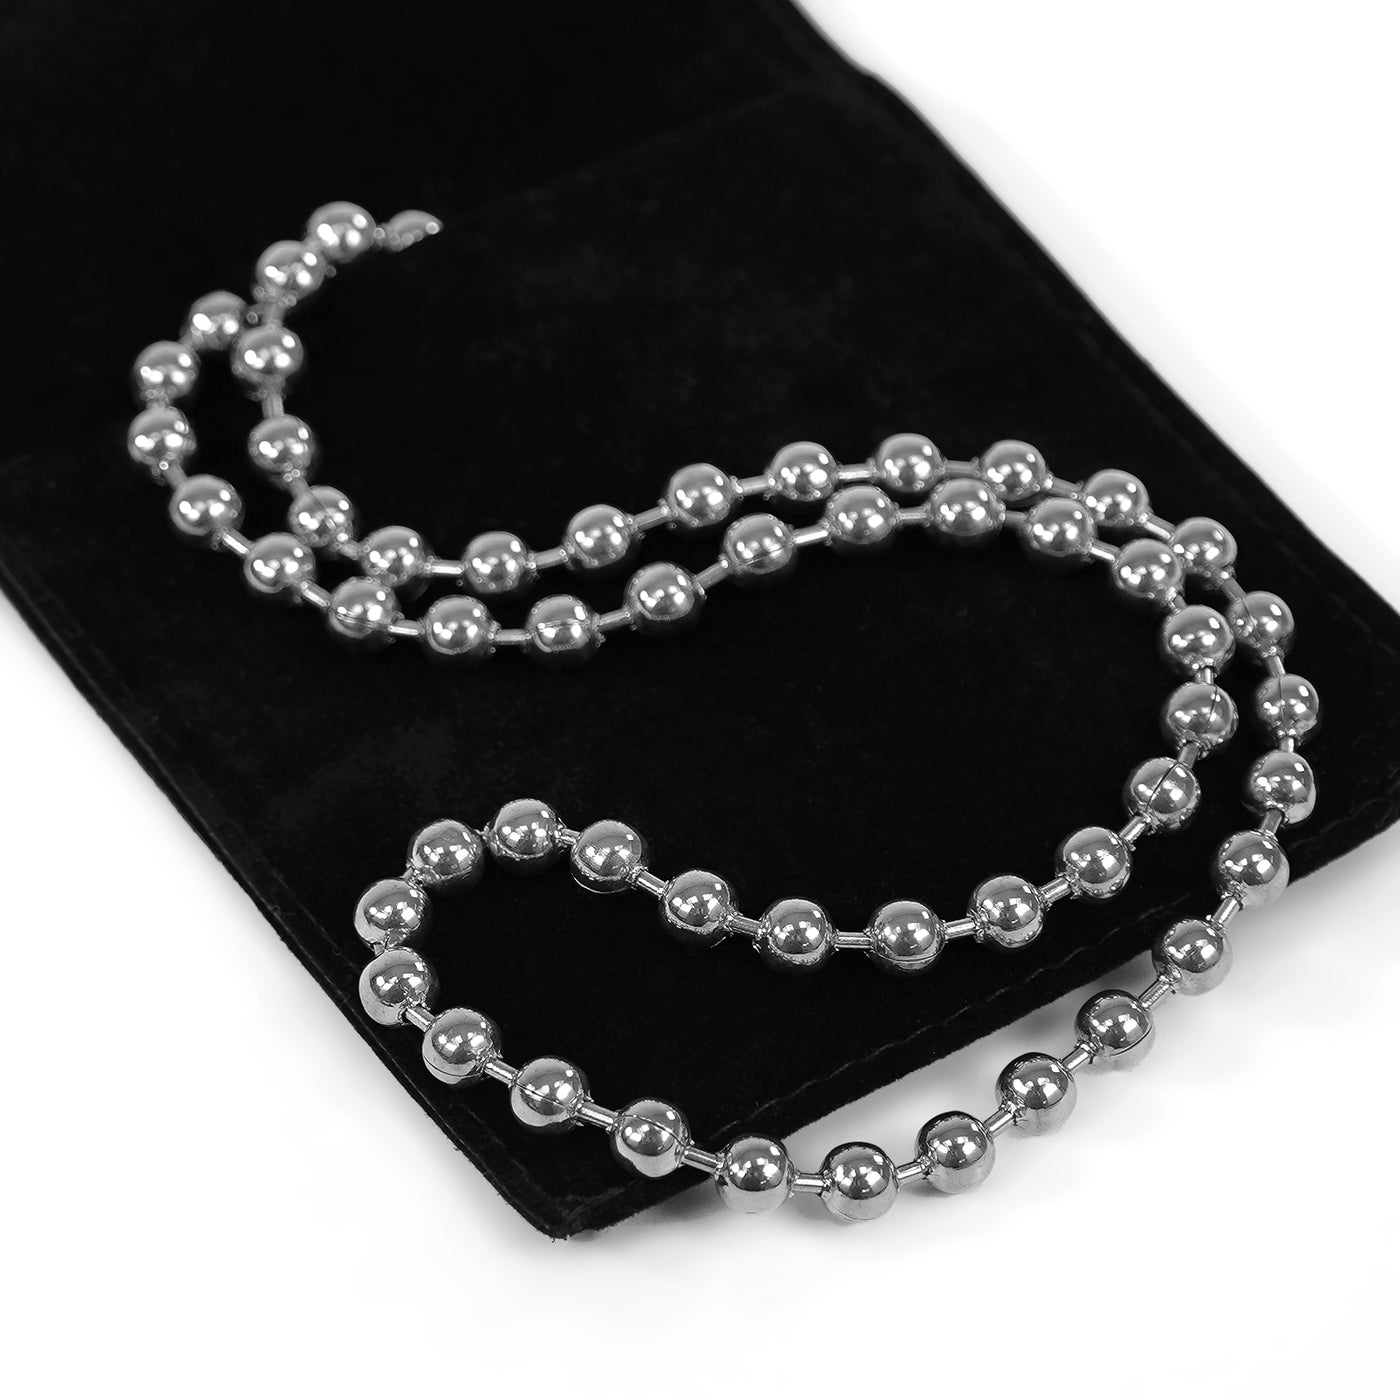 5mm Silver Dog Tag Chain Necklace (29 inches)